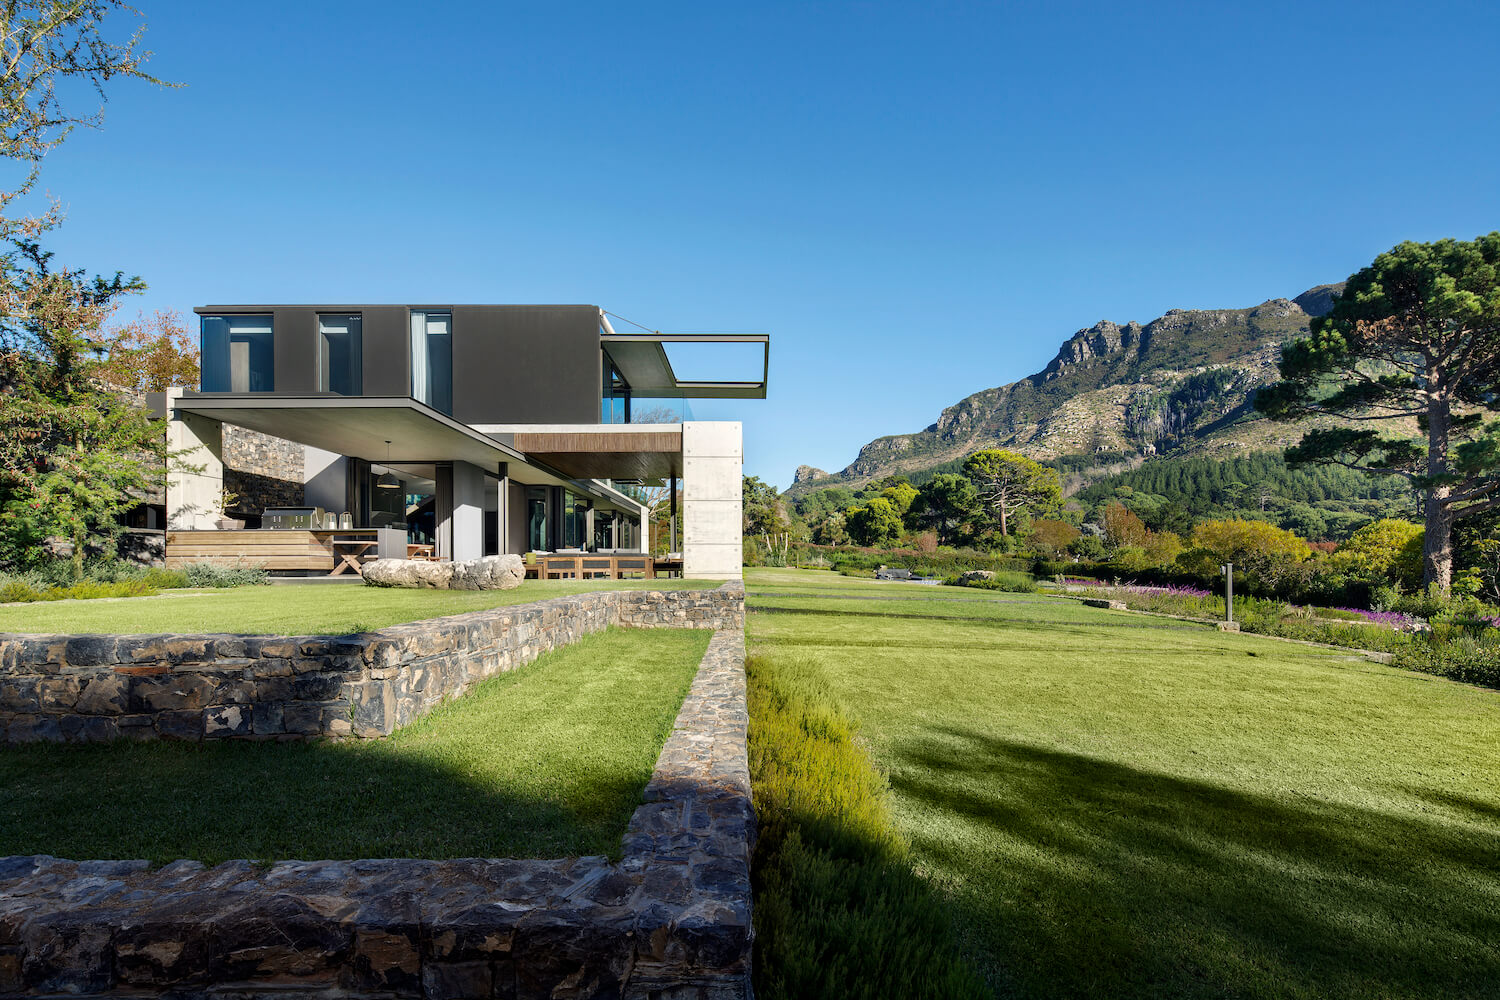 Photo 1 of Constantia Dawn Villa accommodation in Constantia, Cape Town with 5 bedrooms and 5 bathrooms